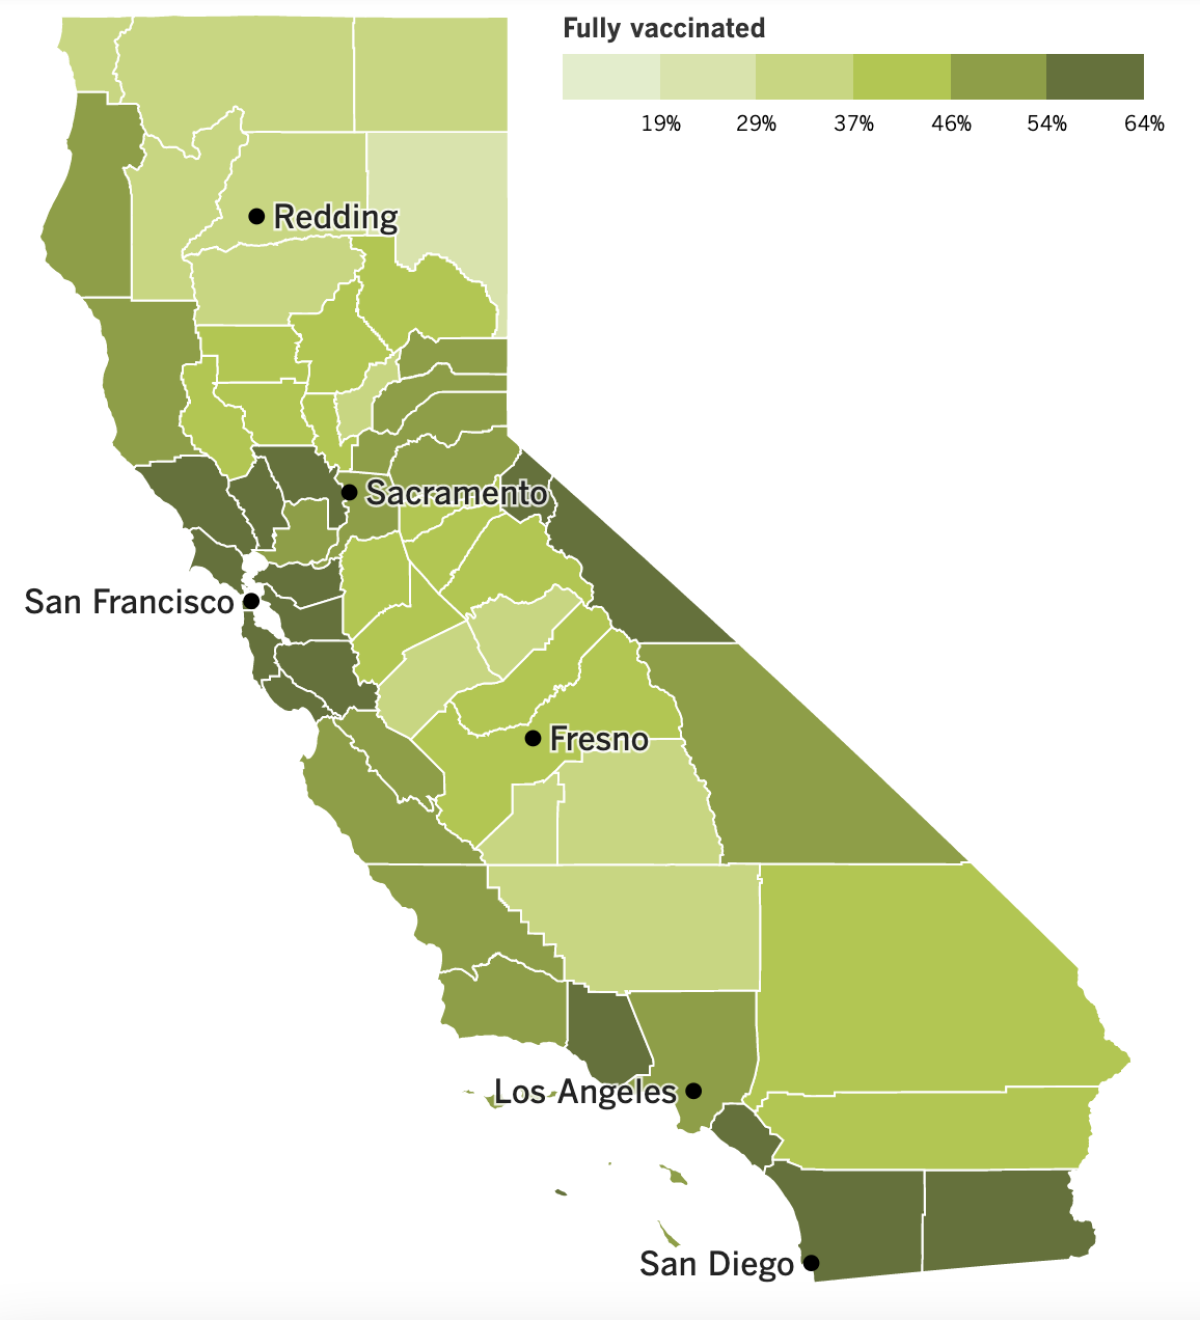 A map of California showing COVID-19 vaccination rate by county.